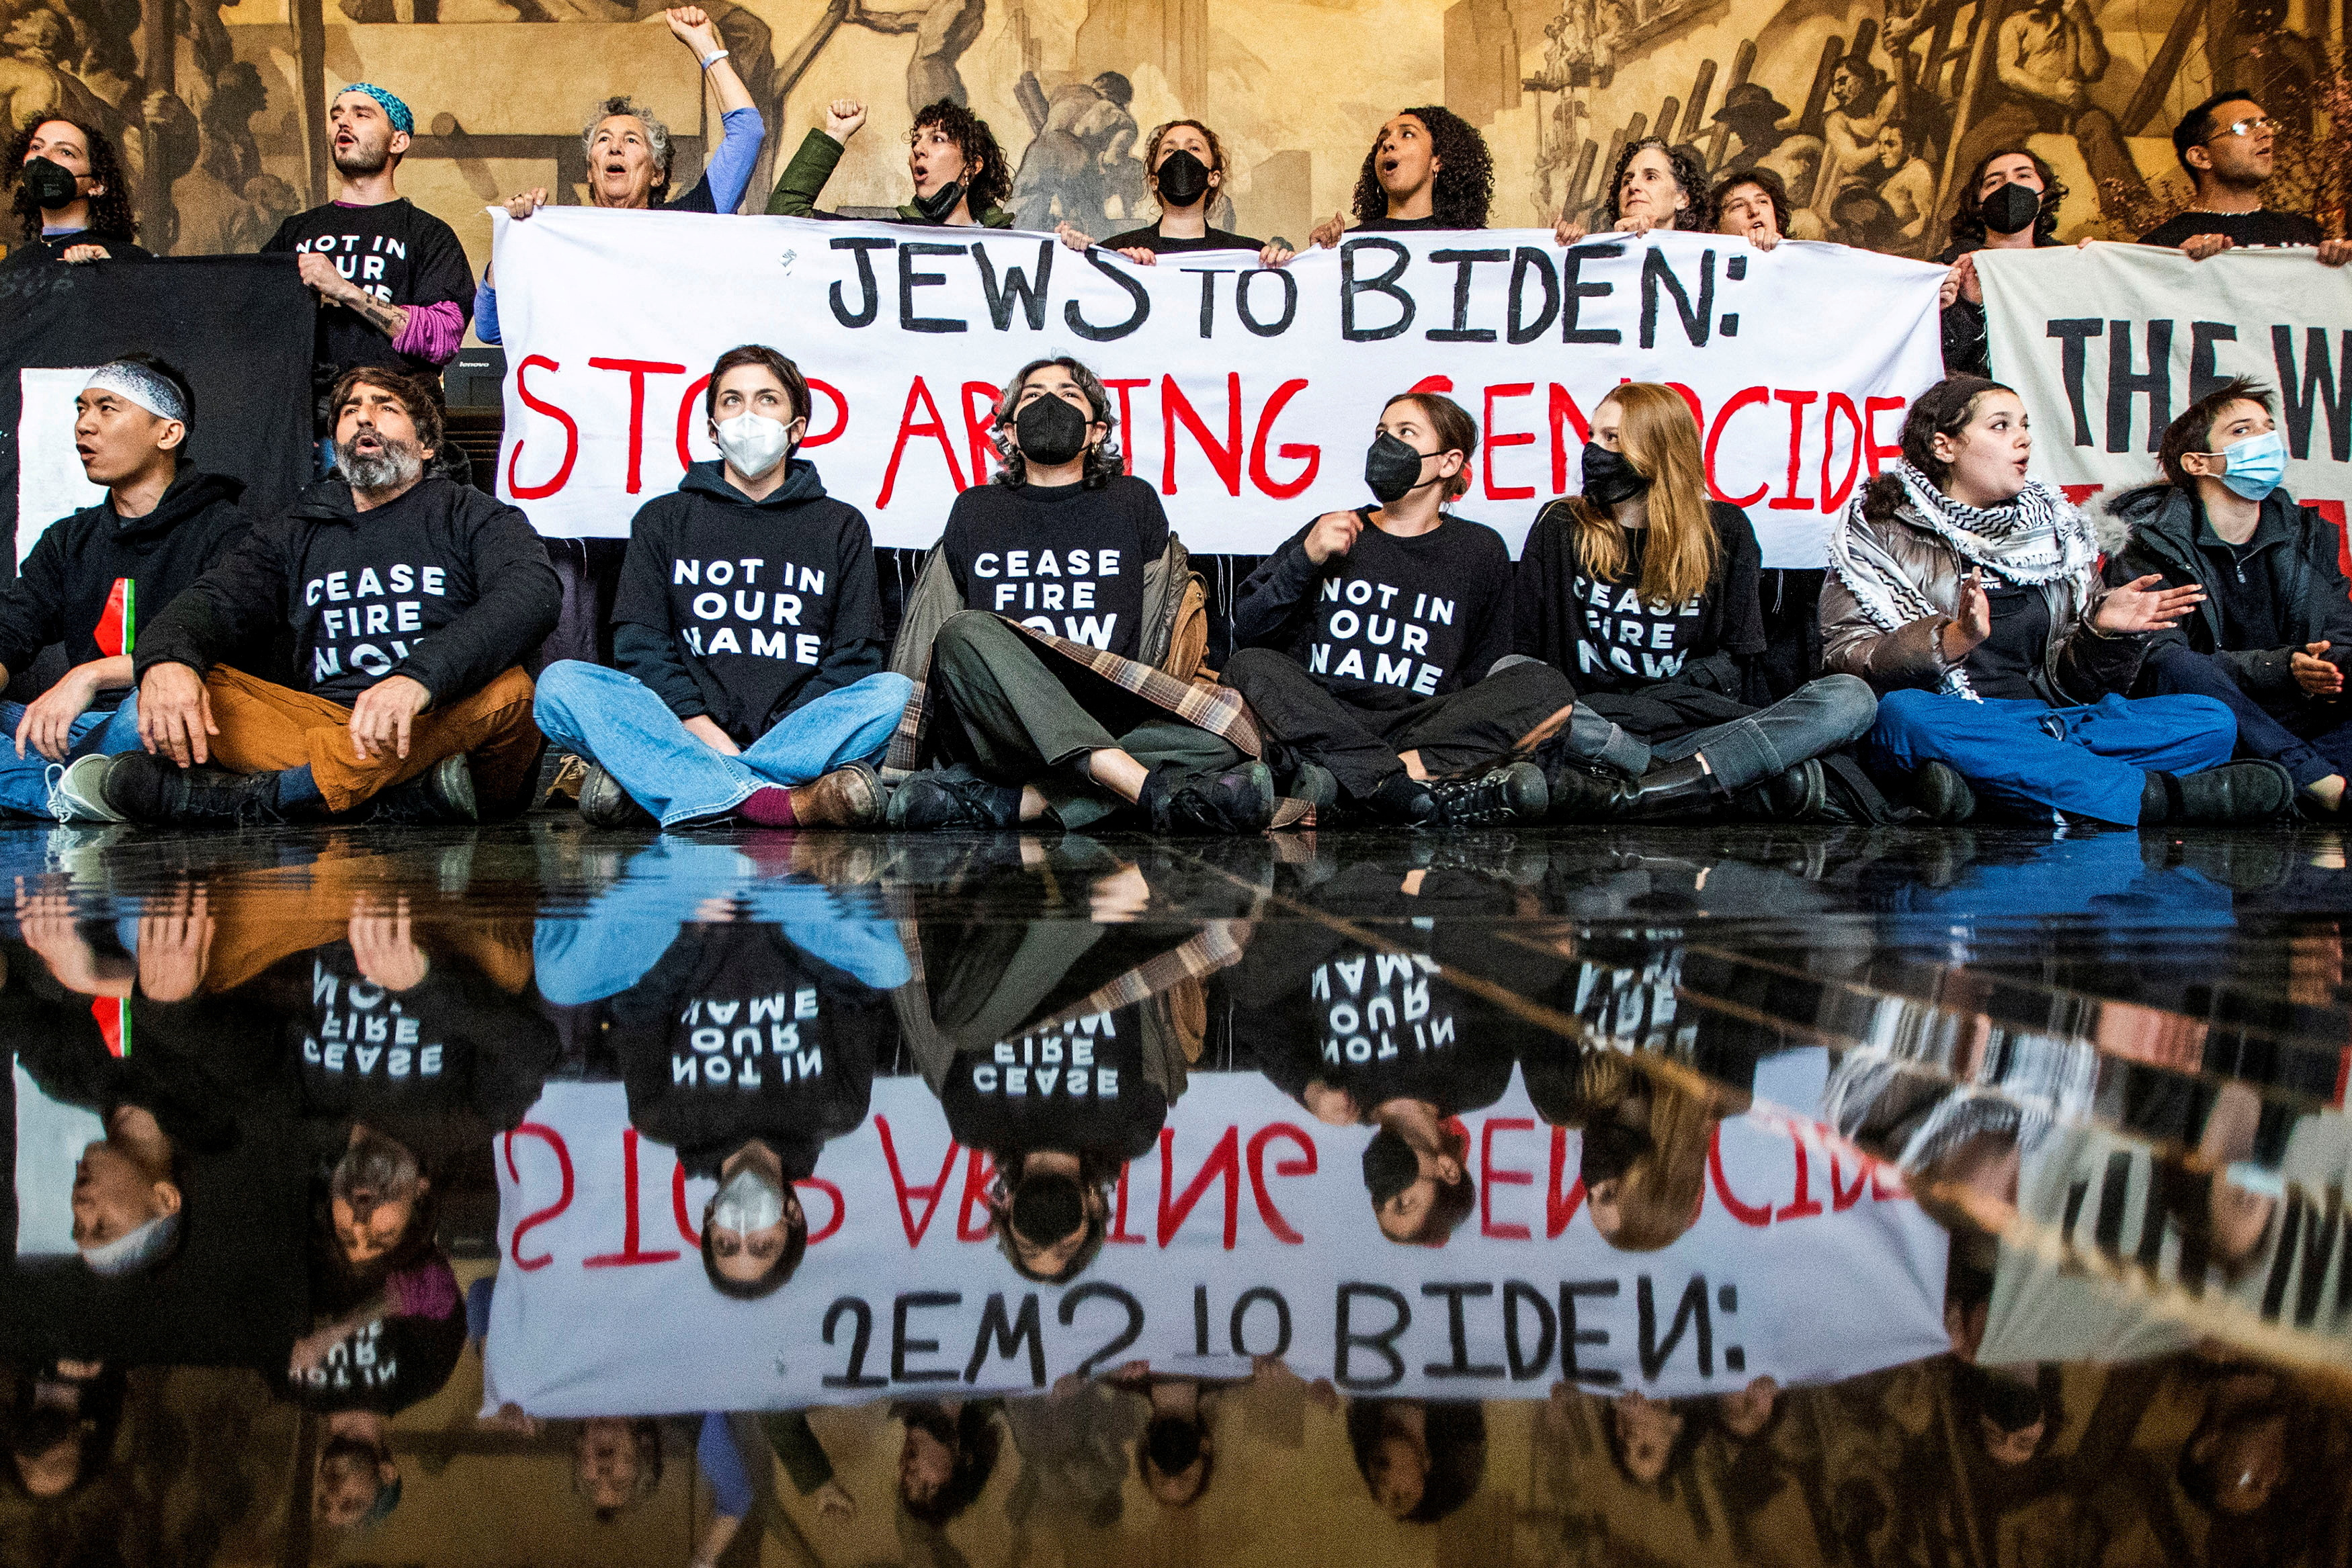 Protesters ask for a ceasefire in the ongoing conflict between Israel and the Palestinian Islamist group Hamas, as U.S. President Biden attends an interview in New York